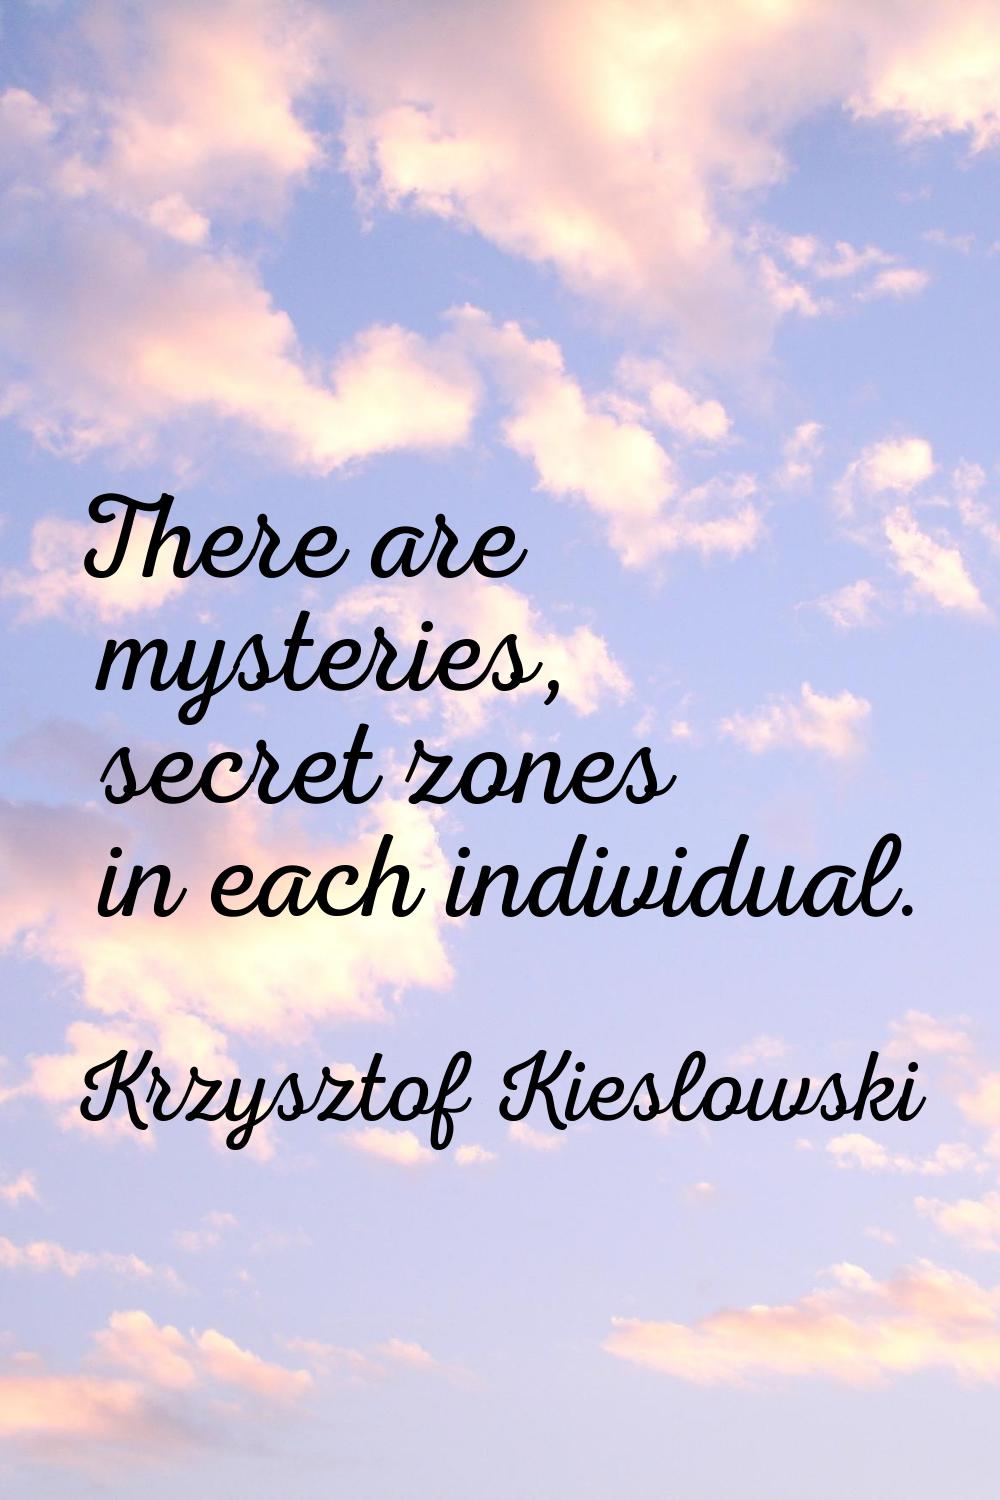 There are mysteries, secret zones in each individual.